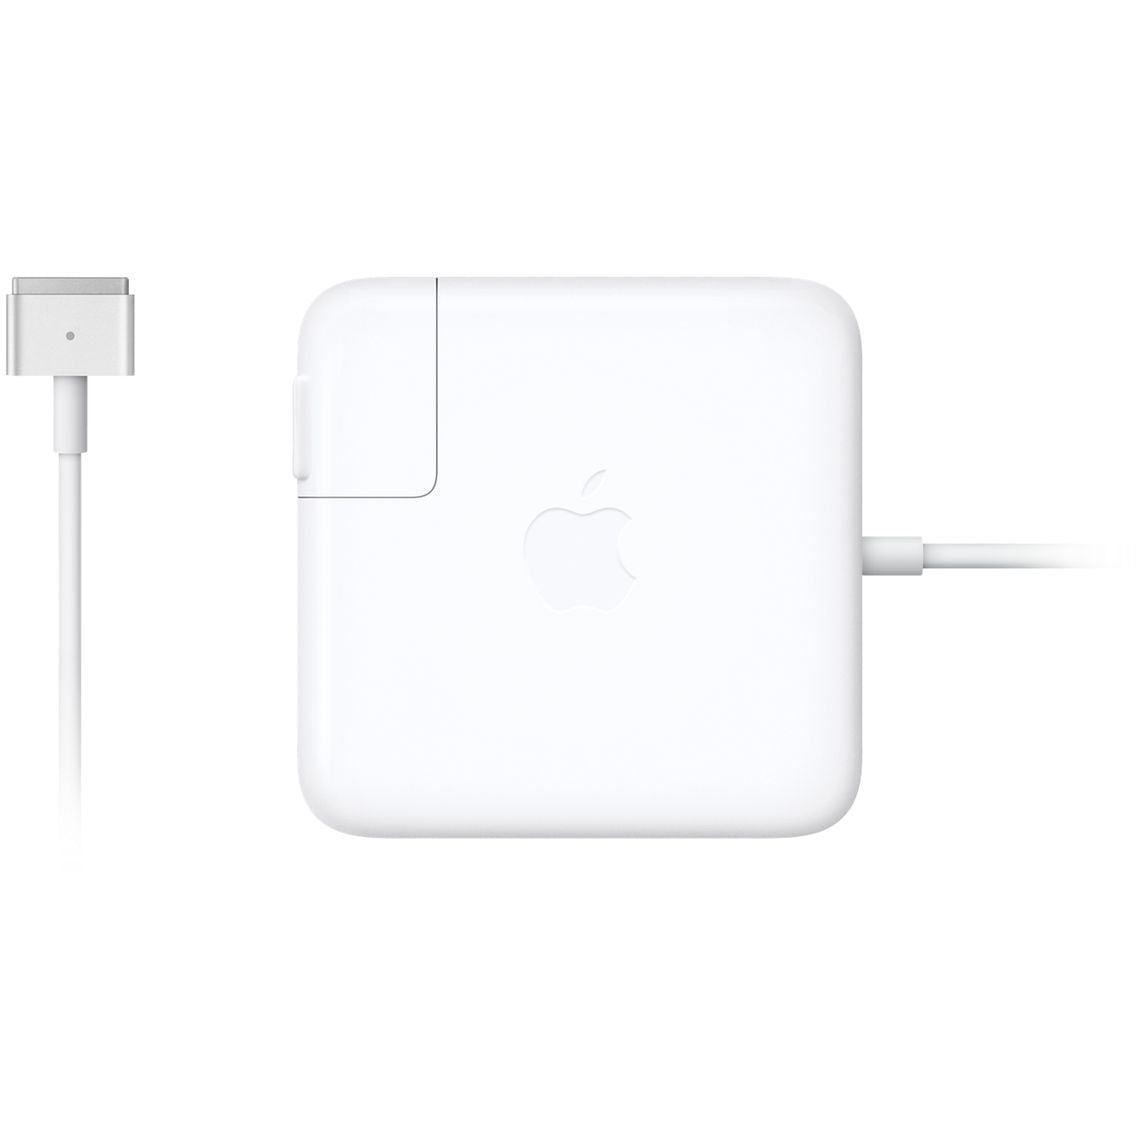 Apple 60W MagSafe 2 Power Adapter (MacBook Pro with 13-inch Retina display) - Grab Your Gadget